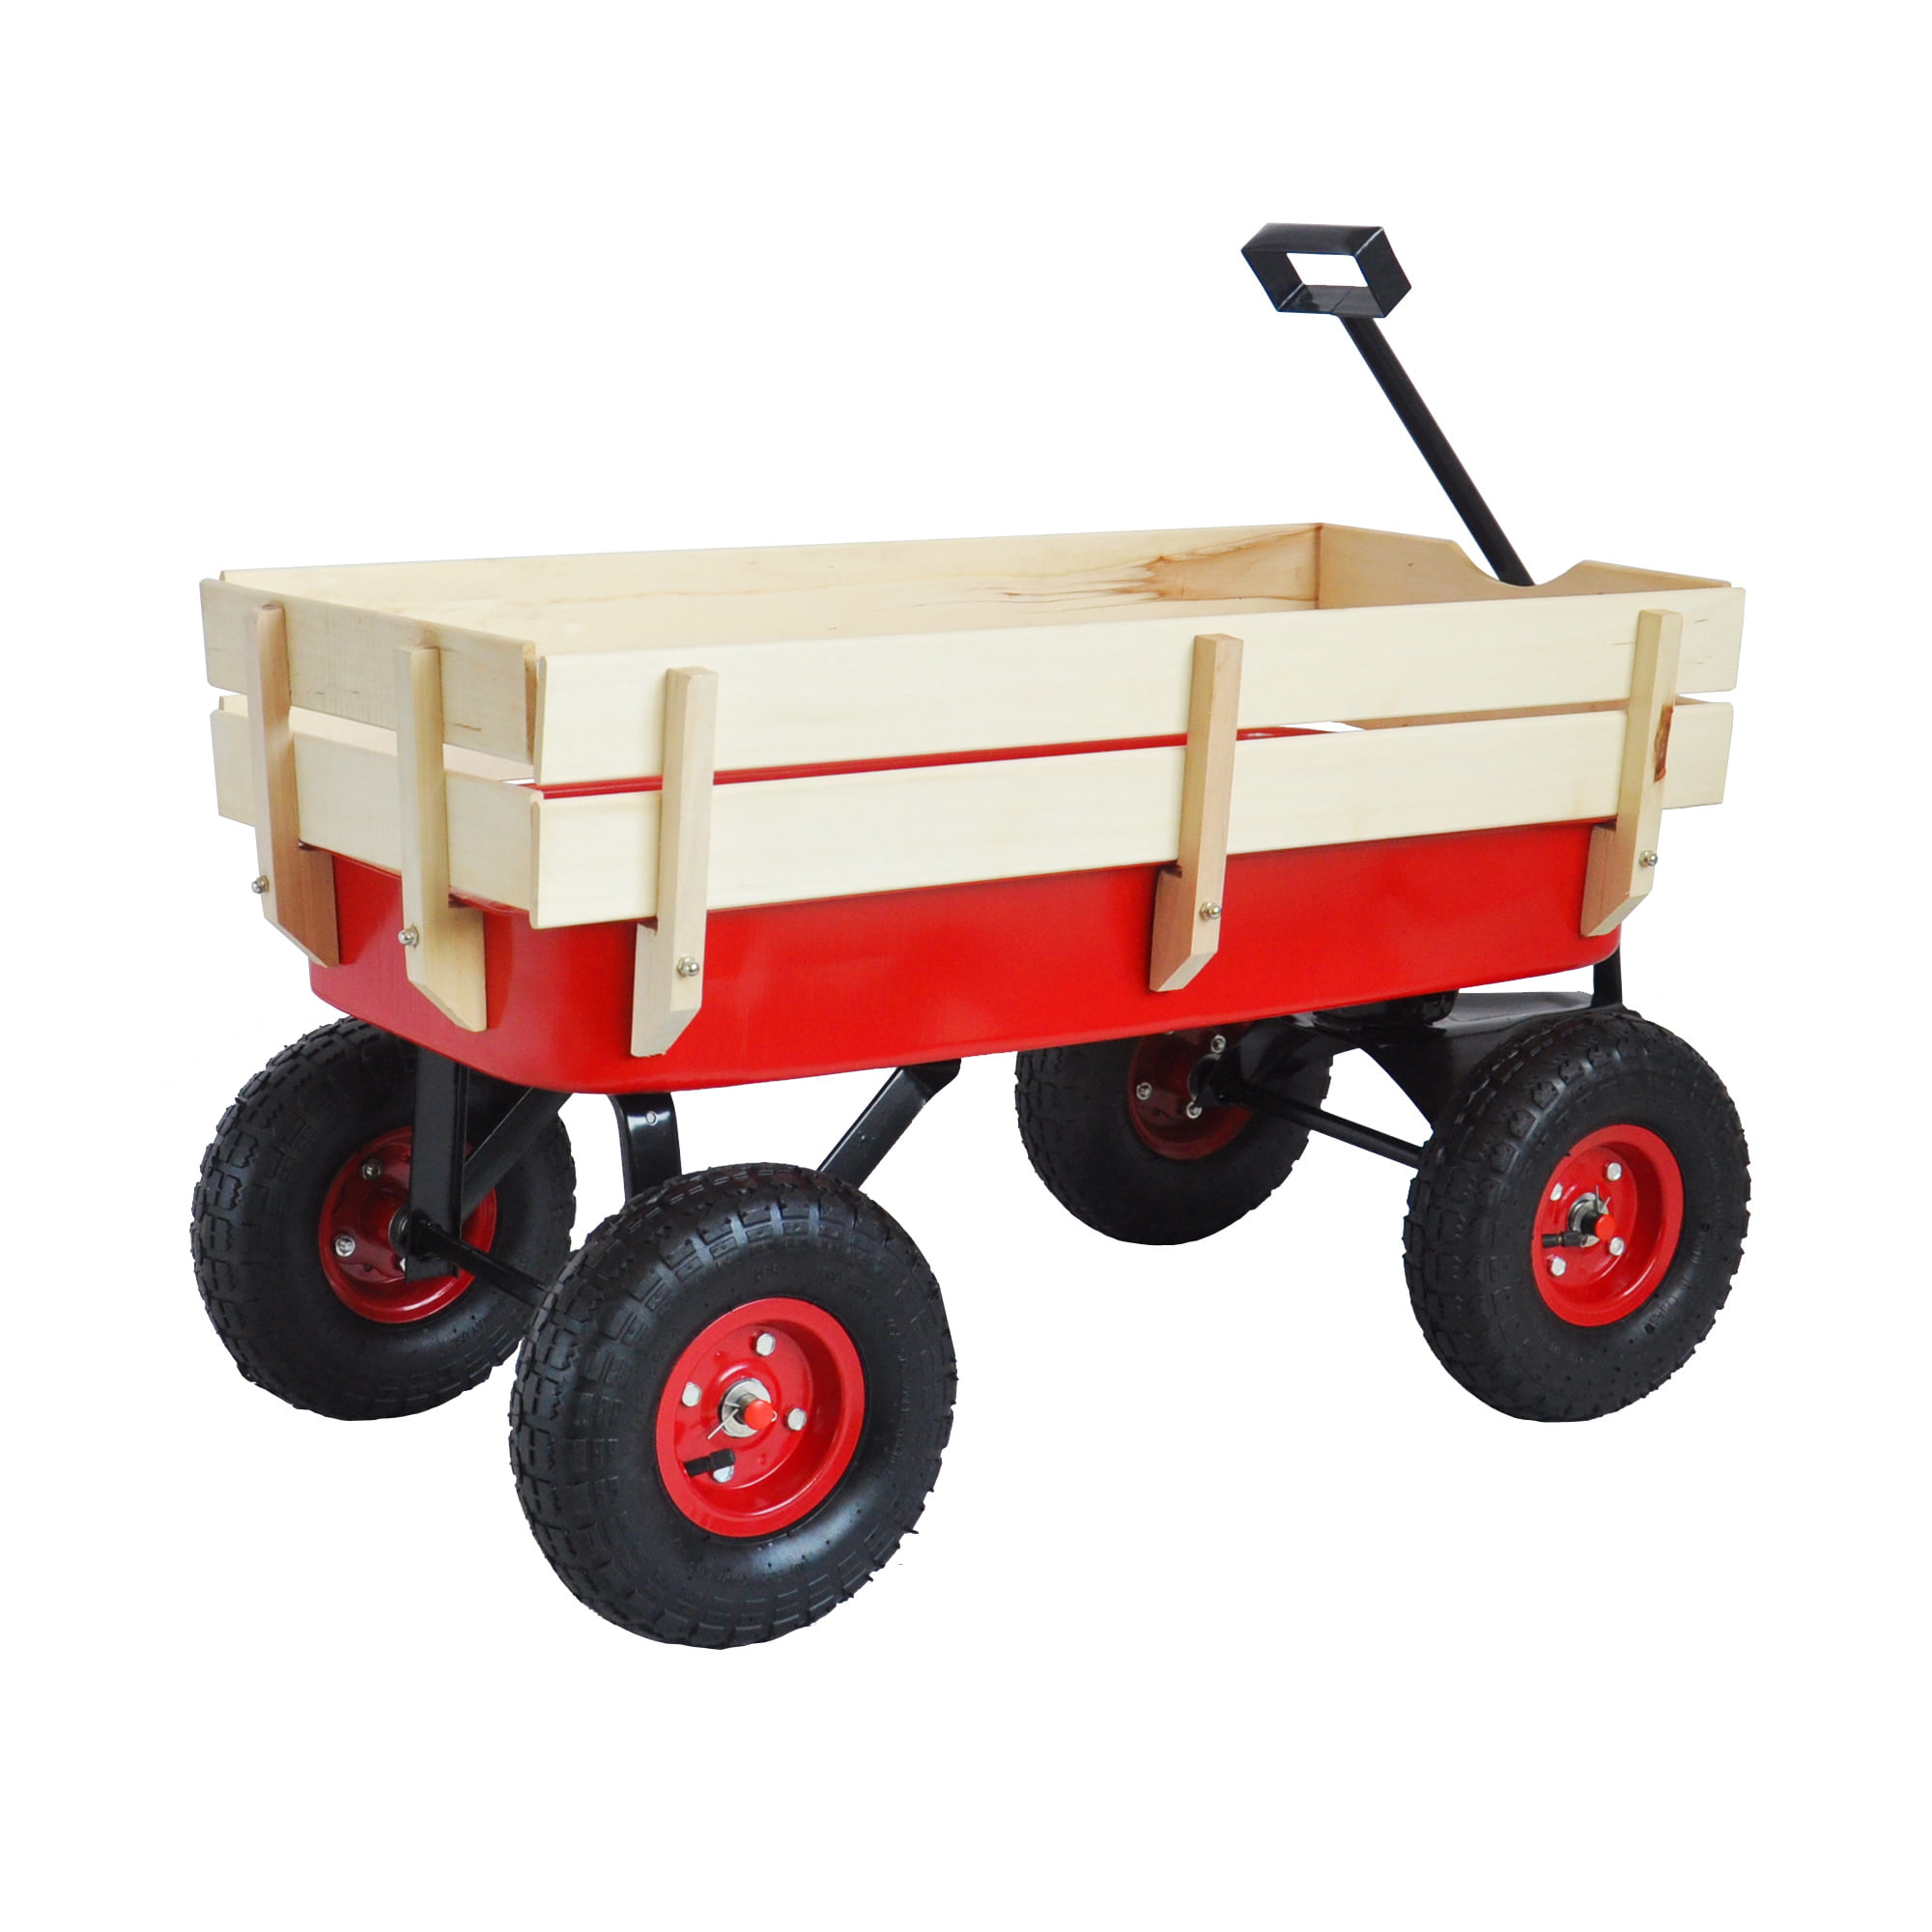 Weight Capacity Sturdy All Steel Wagon Bed ZeHuoGe Outdoor Sport Red Wagon All Terrain Pulling w/Removable Wooden Side Panels Air Tires Big Foot Panel Wagon 330 lbs Red 